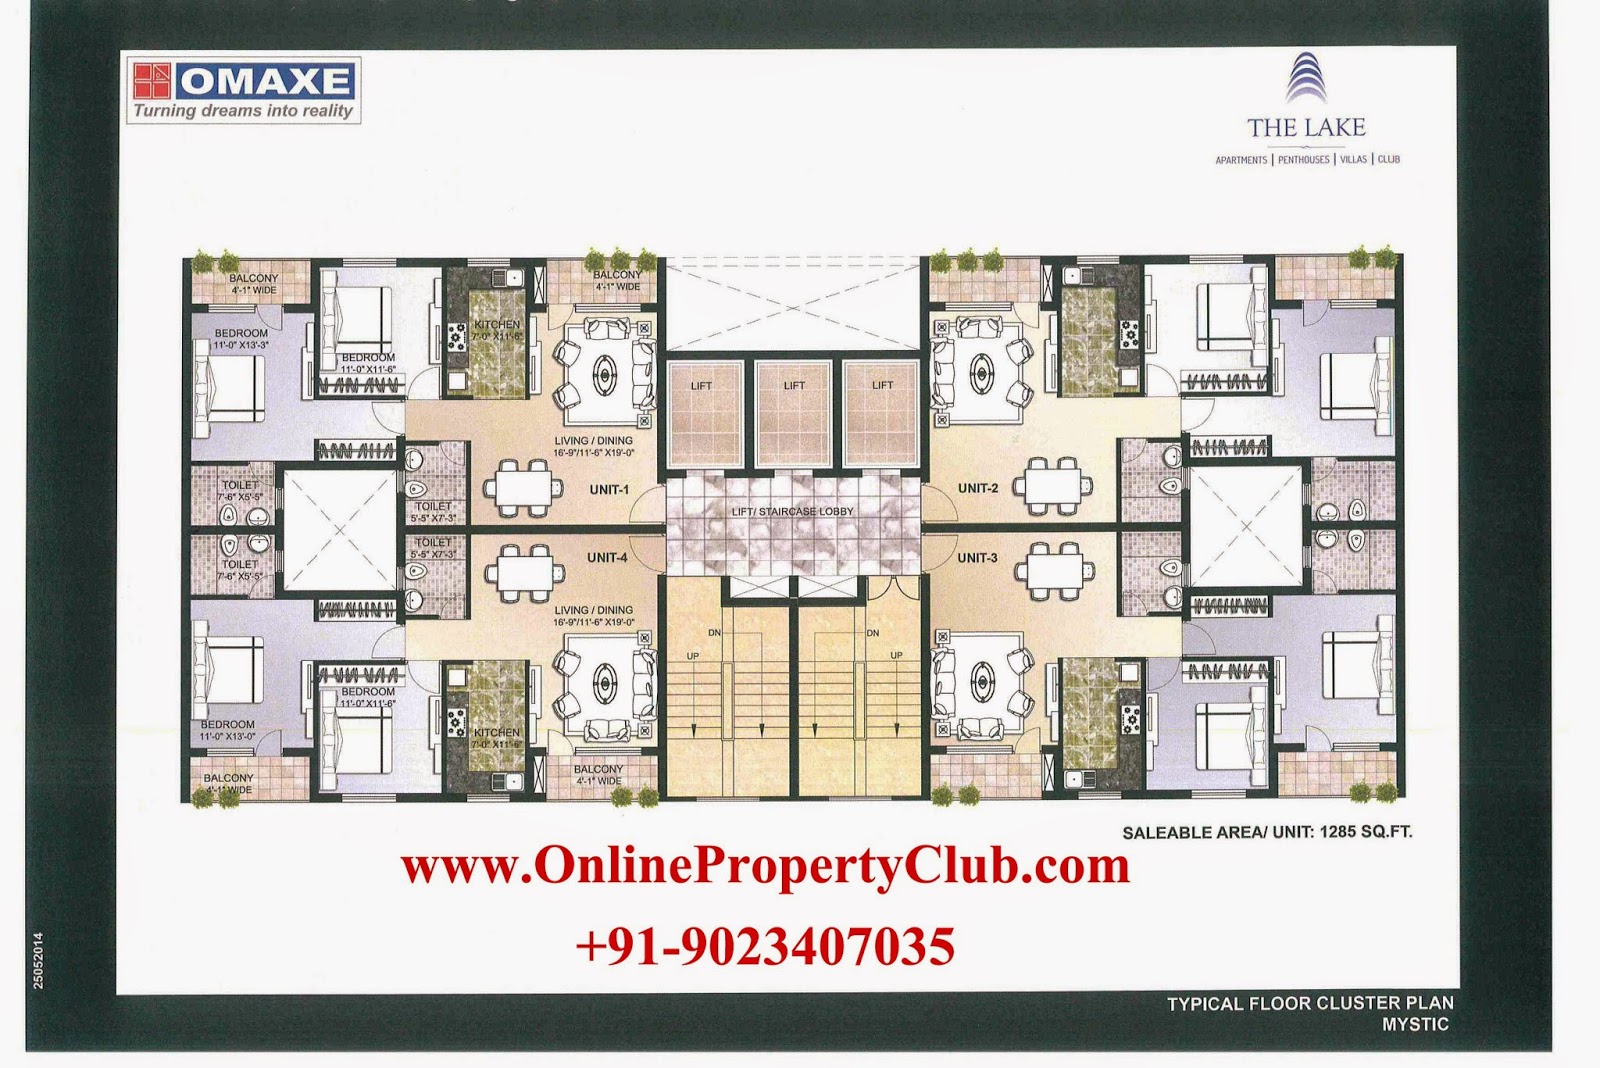 The Lake - 2,3,4 BHK Flats Apartments in Omaxe New Chandigarh Mullanpur